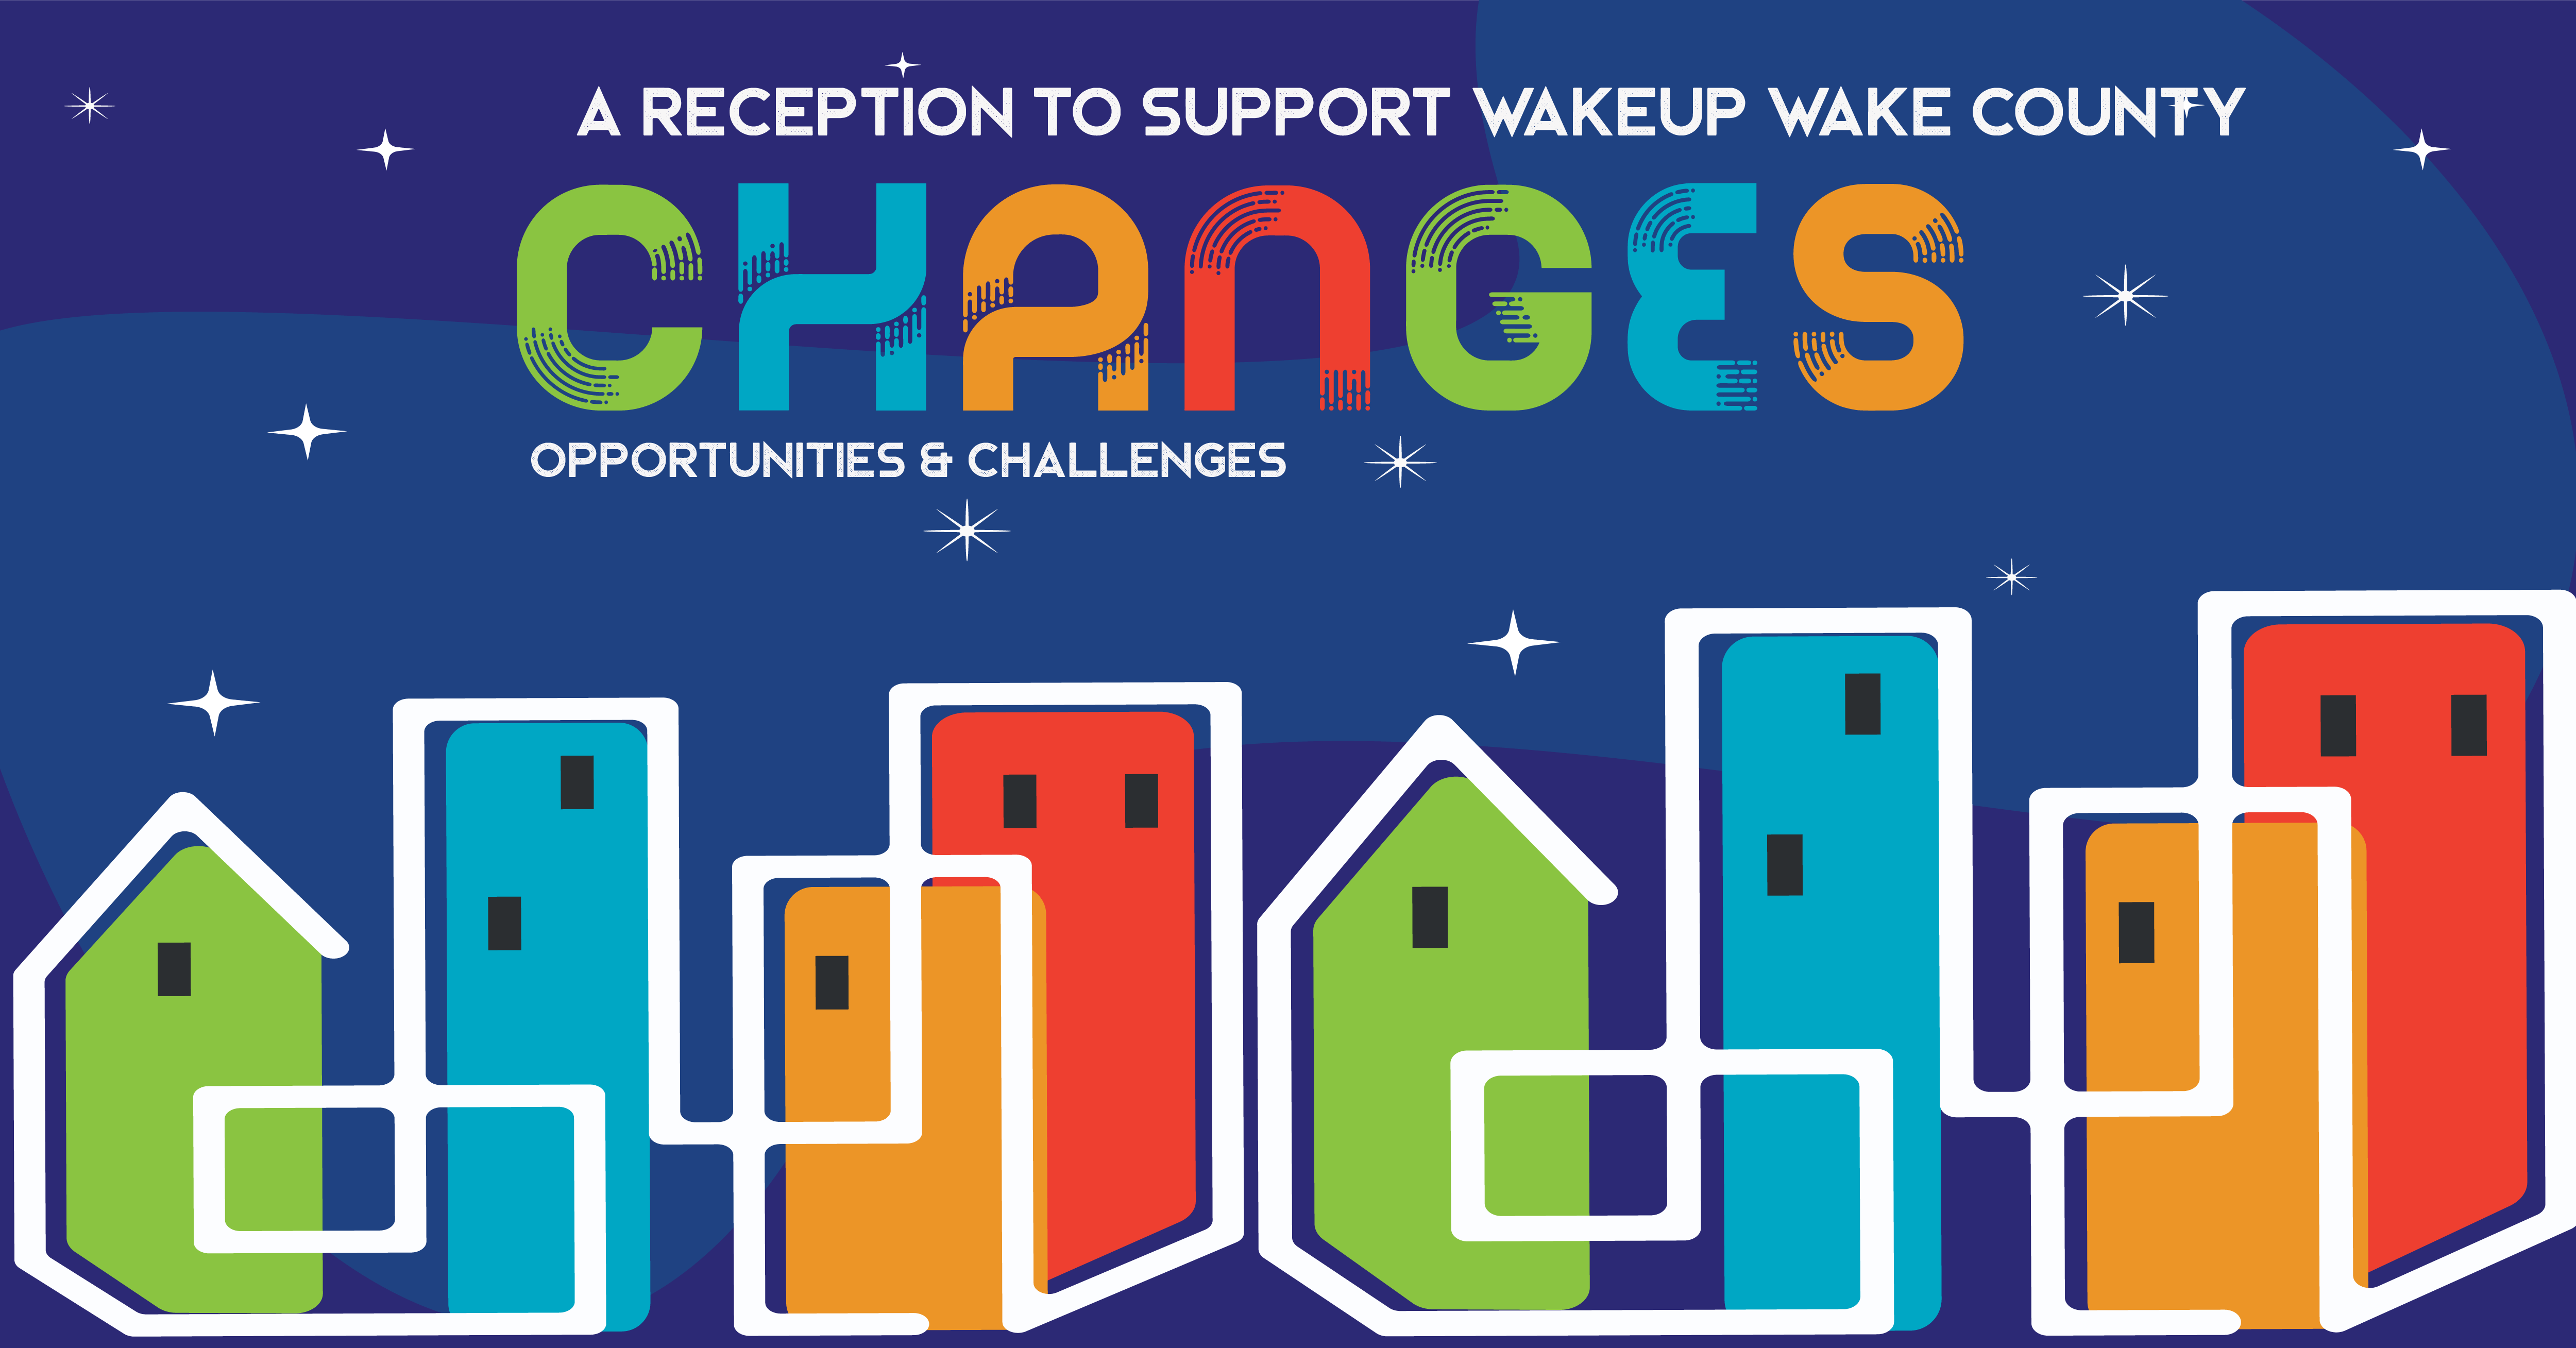 WakeUP Summer Reception Highlights Both The Challenges And Opportunities That Lie Ahead For Wake County